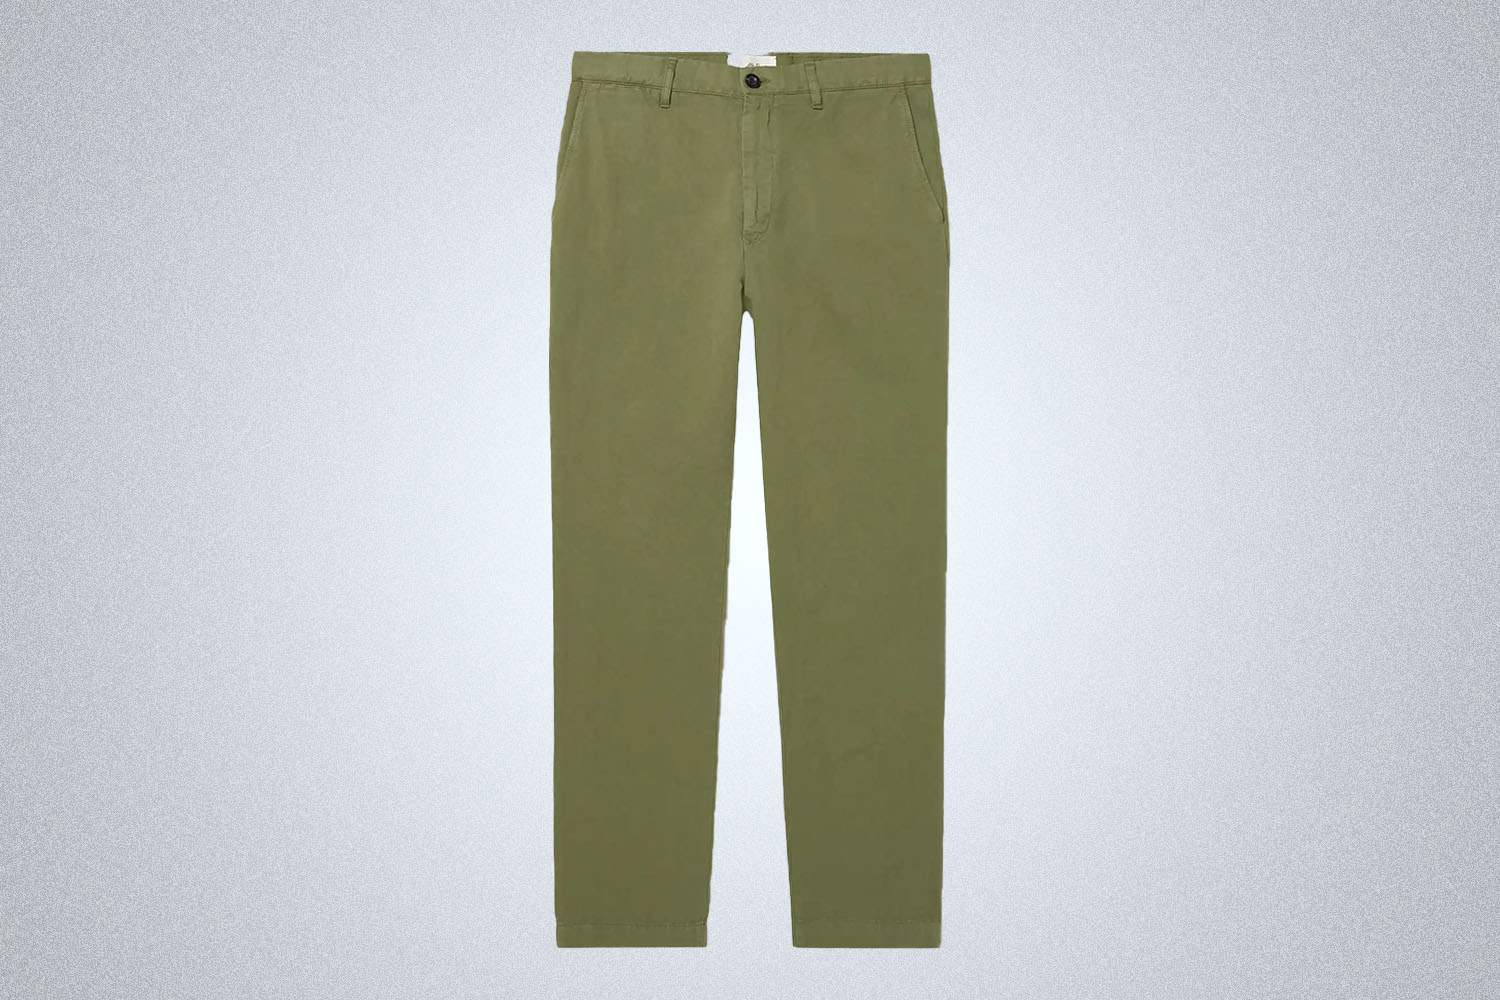 a pair of green chinos from Mr. Porter on a grey background